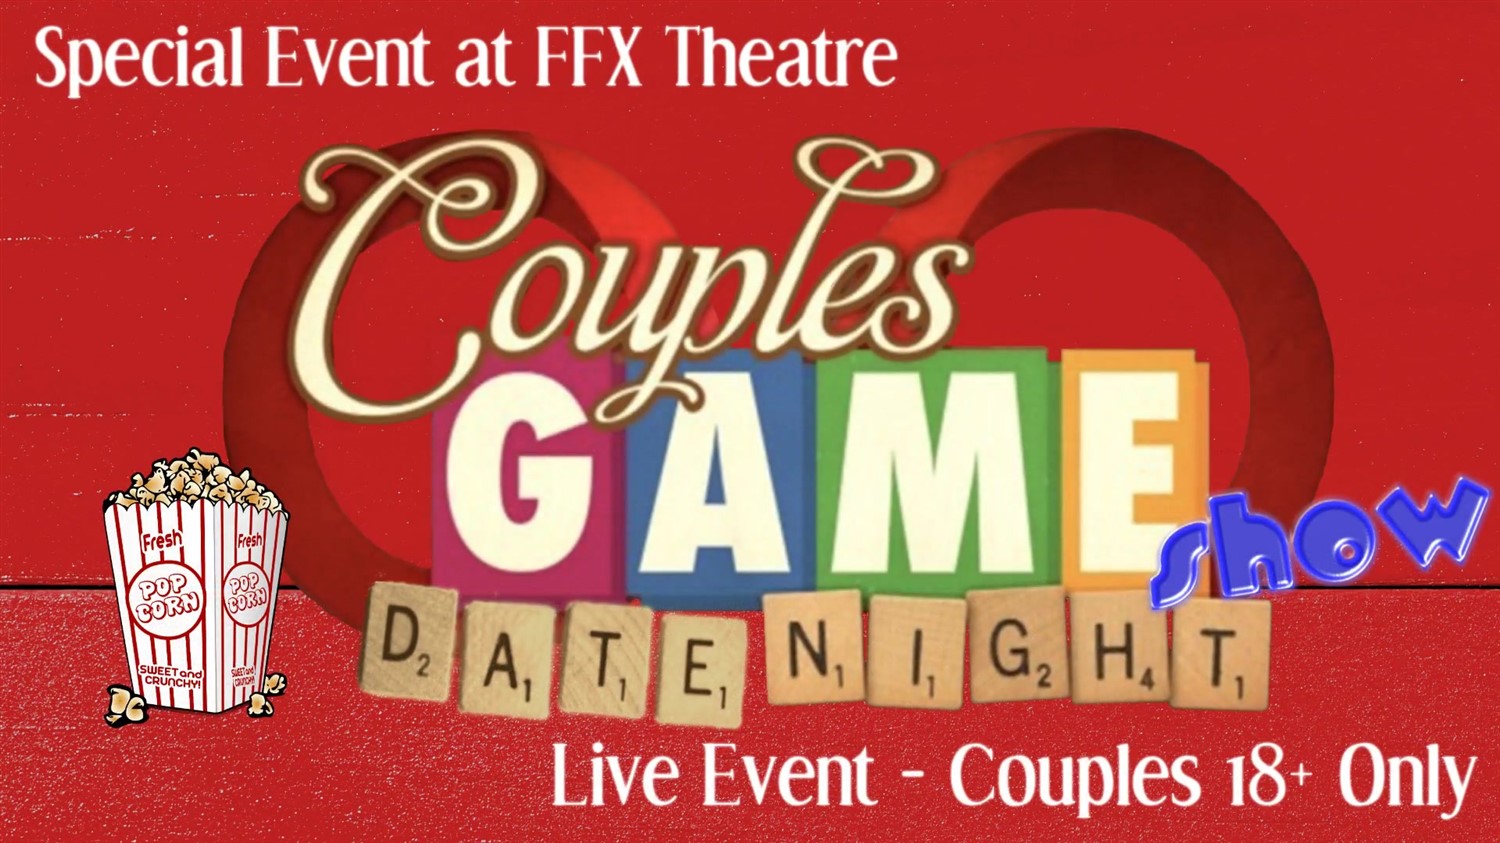 Couples Date Night Game Show! Live Game Show - Couples Only - Date Night FUN! on Jun 08, 20:00@FFX Theatre - Pick a seat, Buy tickets and Get information on Family Fun Xperience tickets.ffxshow.org